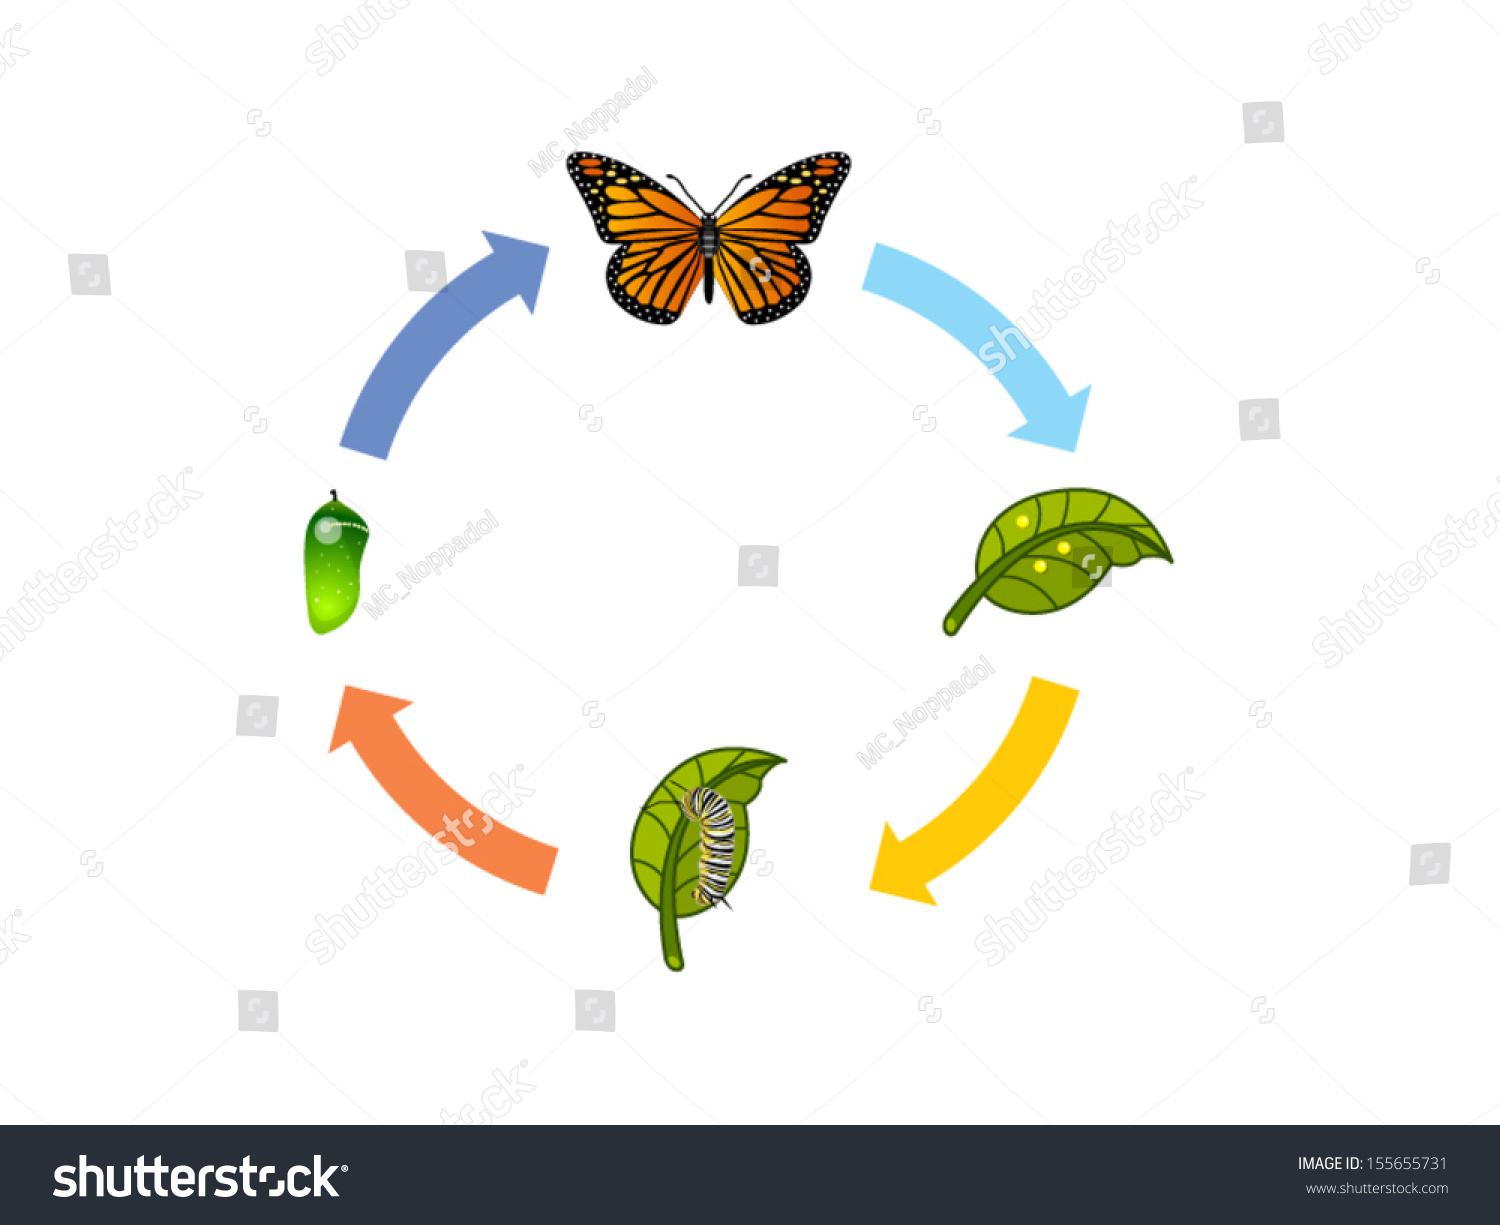 Butterfly Life Cycle Stock Vector Illustration 155655731 : Shutterstock